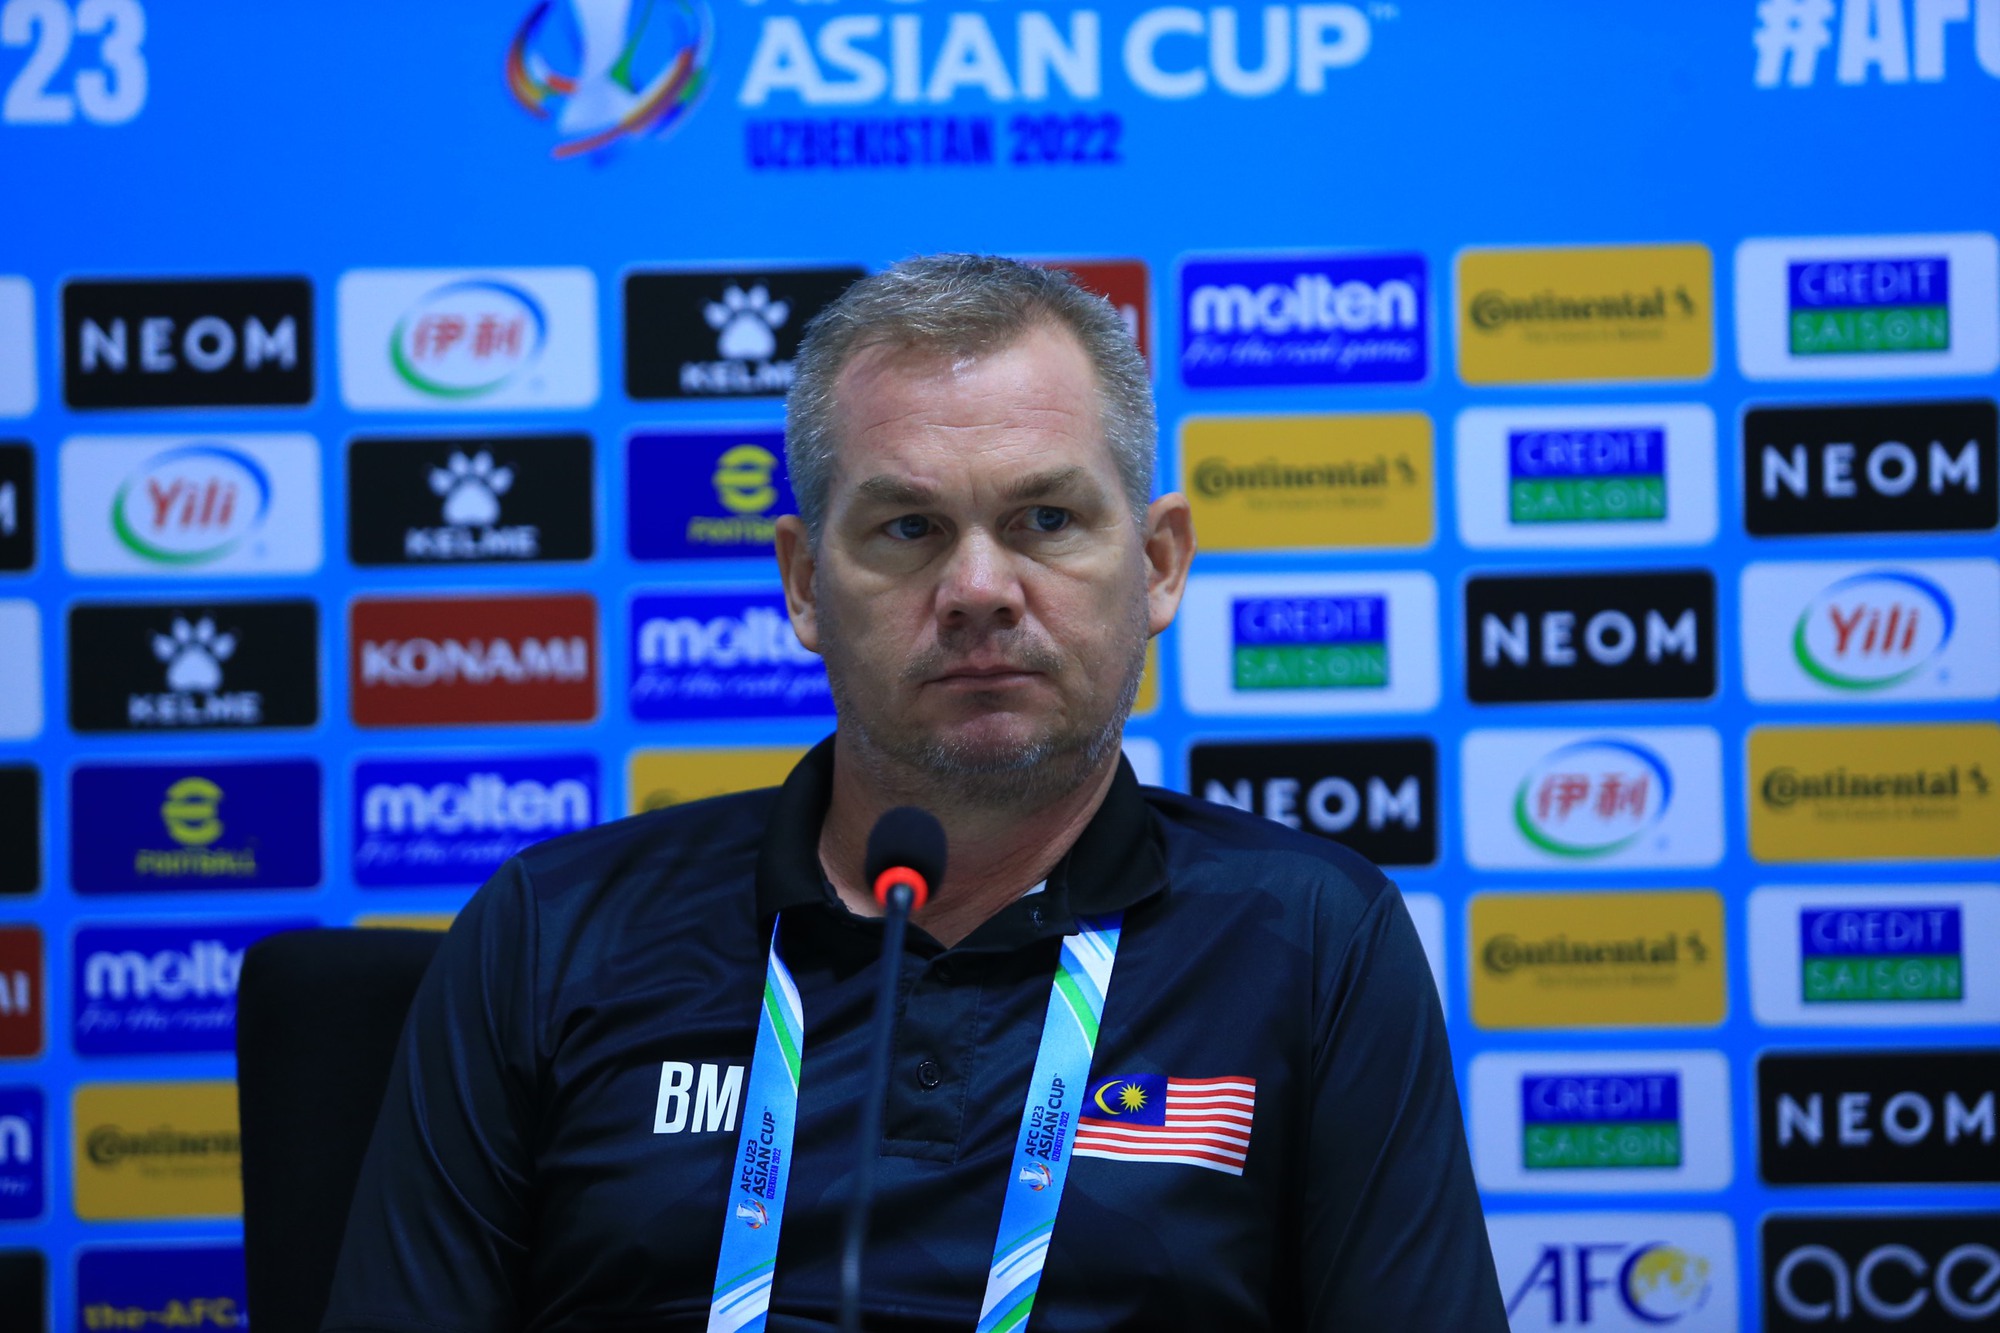 Coach U23 Malaysia: I don't understand why my player received a red card - Photo 1.